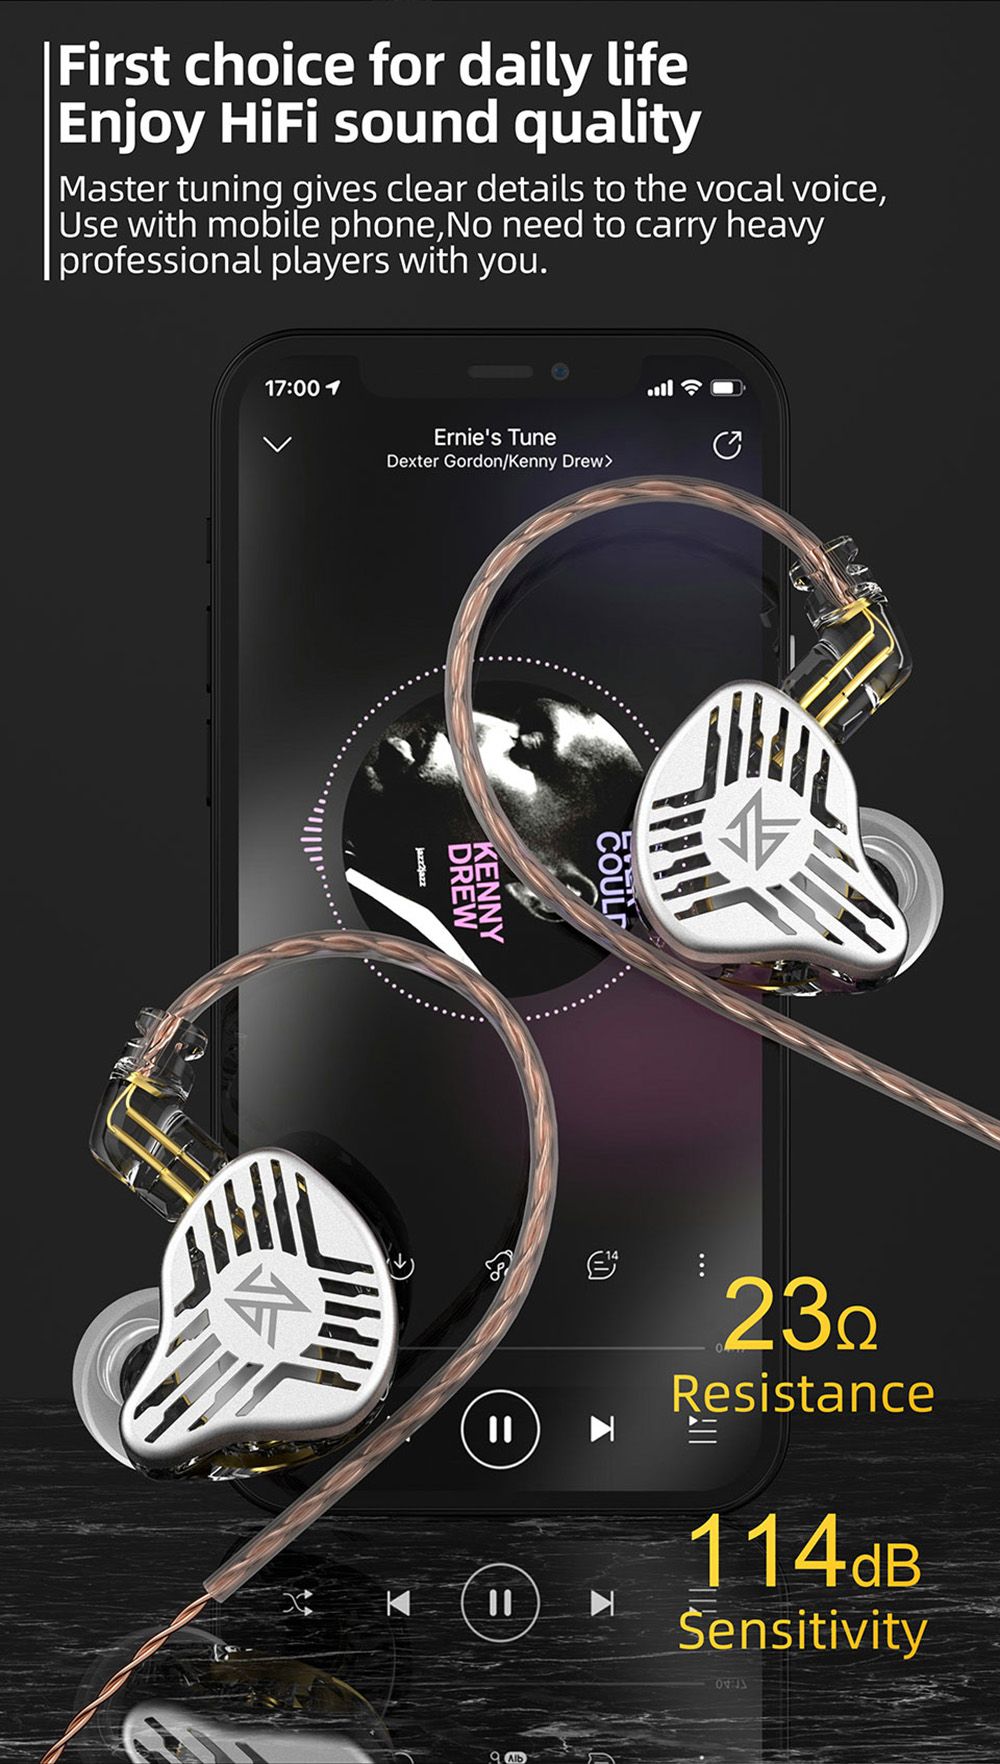 KZ EDS Wired Earphones In-Ear Dual Magnetic Dynamic Drivers HiFi In Ear with Mic for Musician Audiophile - Black